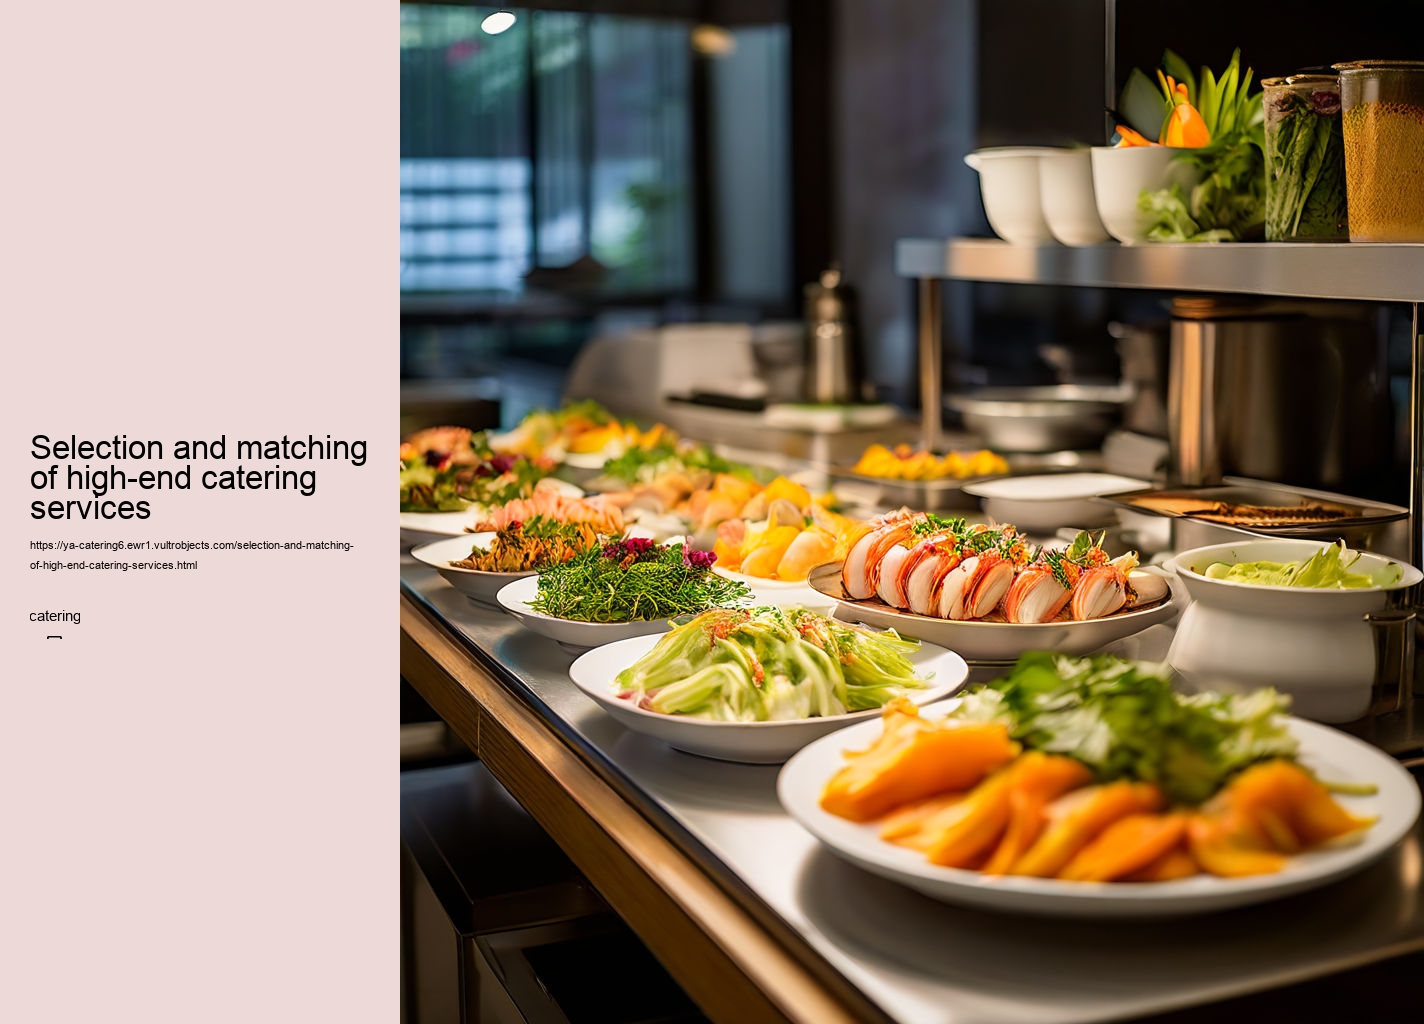 Selection and matching of high-end catering services